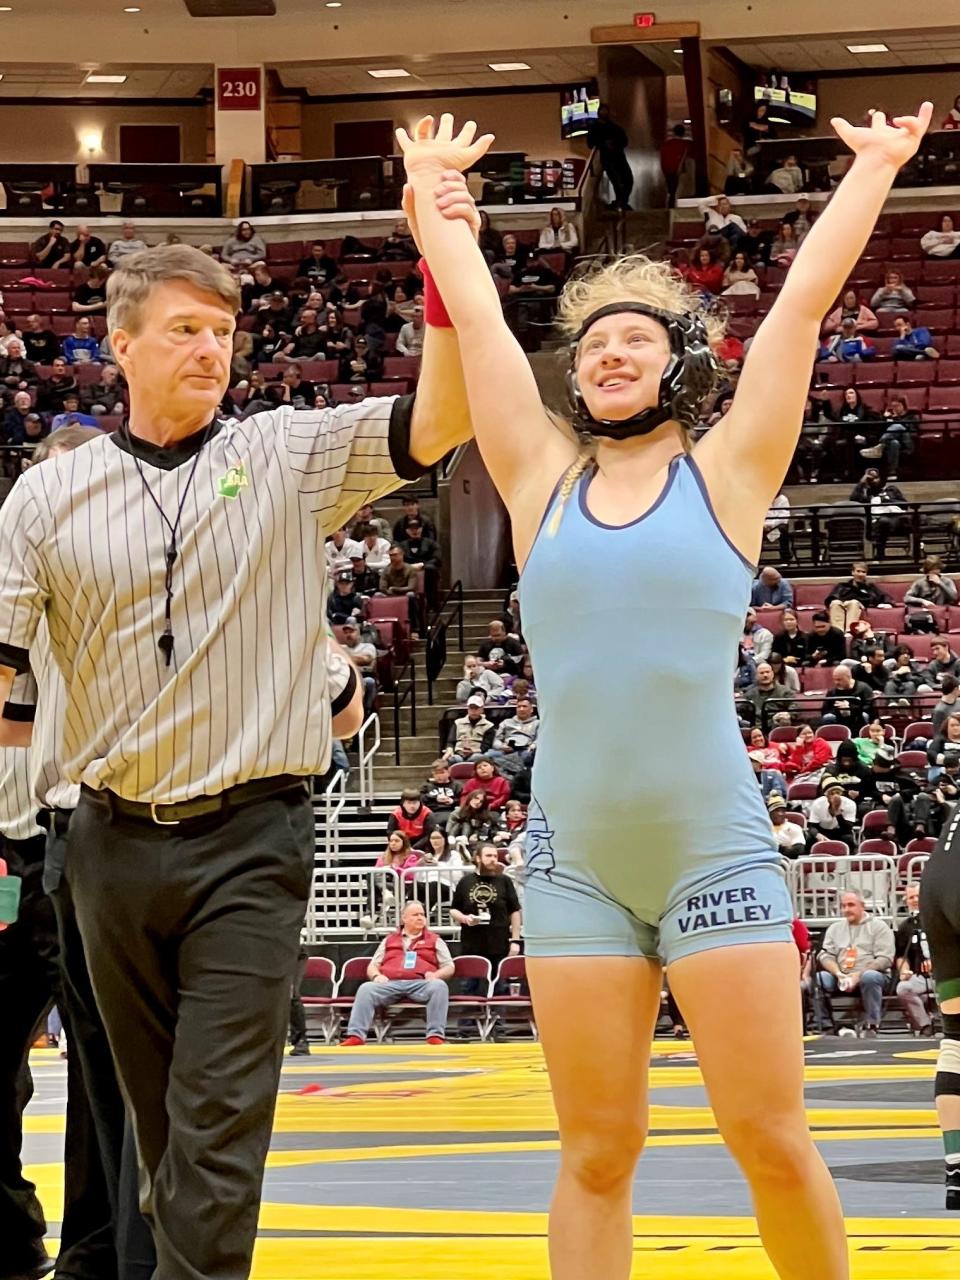 River Valley's Lila Mencer gets her hand raised during this year's state wrestling tournament, the first time girls performed at Ohio State's Schottenstein Center for state. She was named Fahey Bank Athlete of the Month for March among Marion County girls.